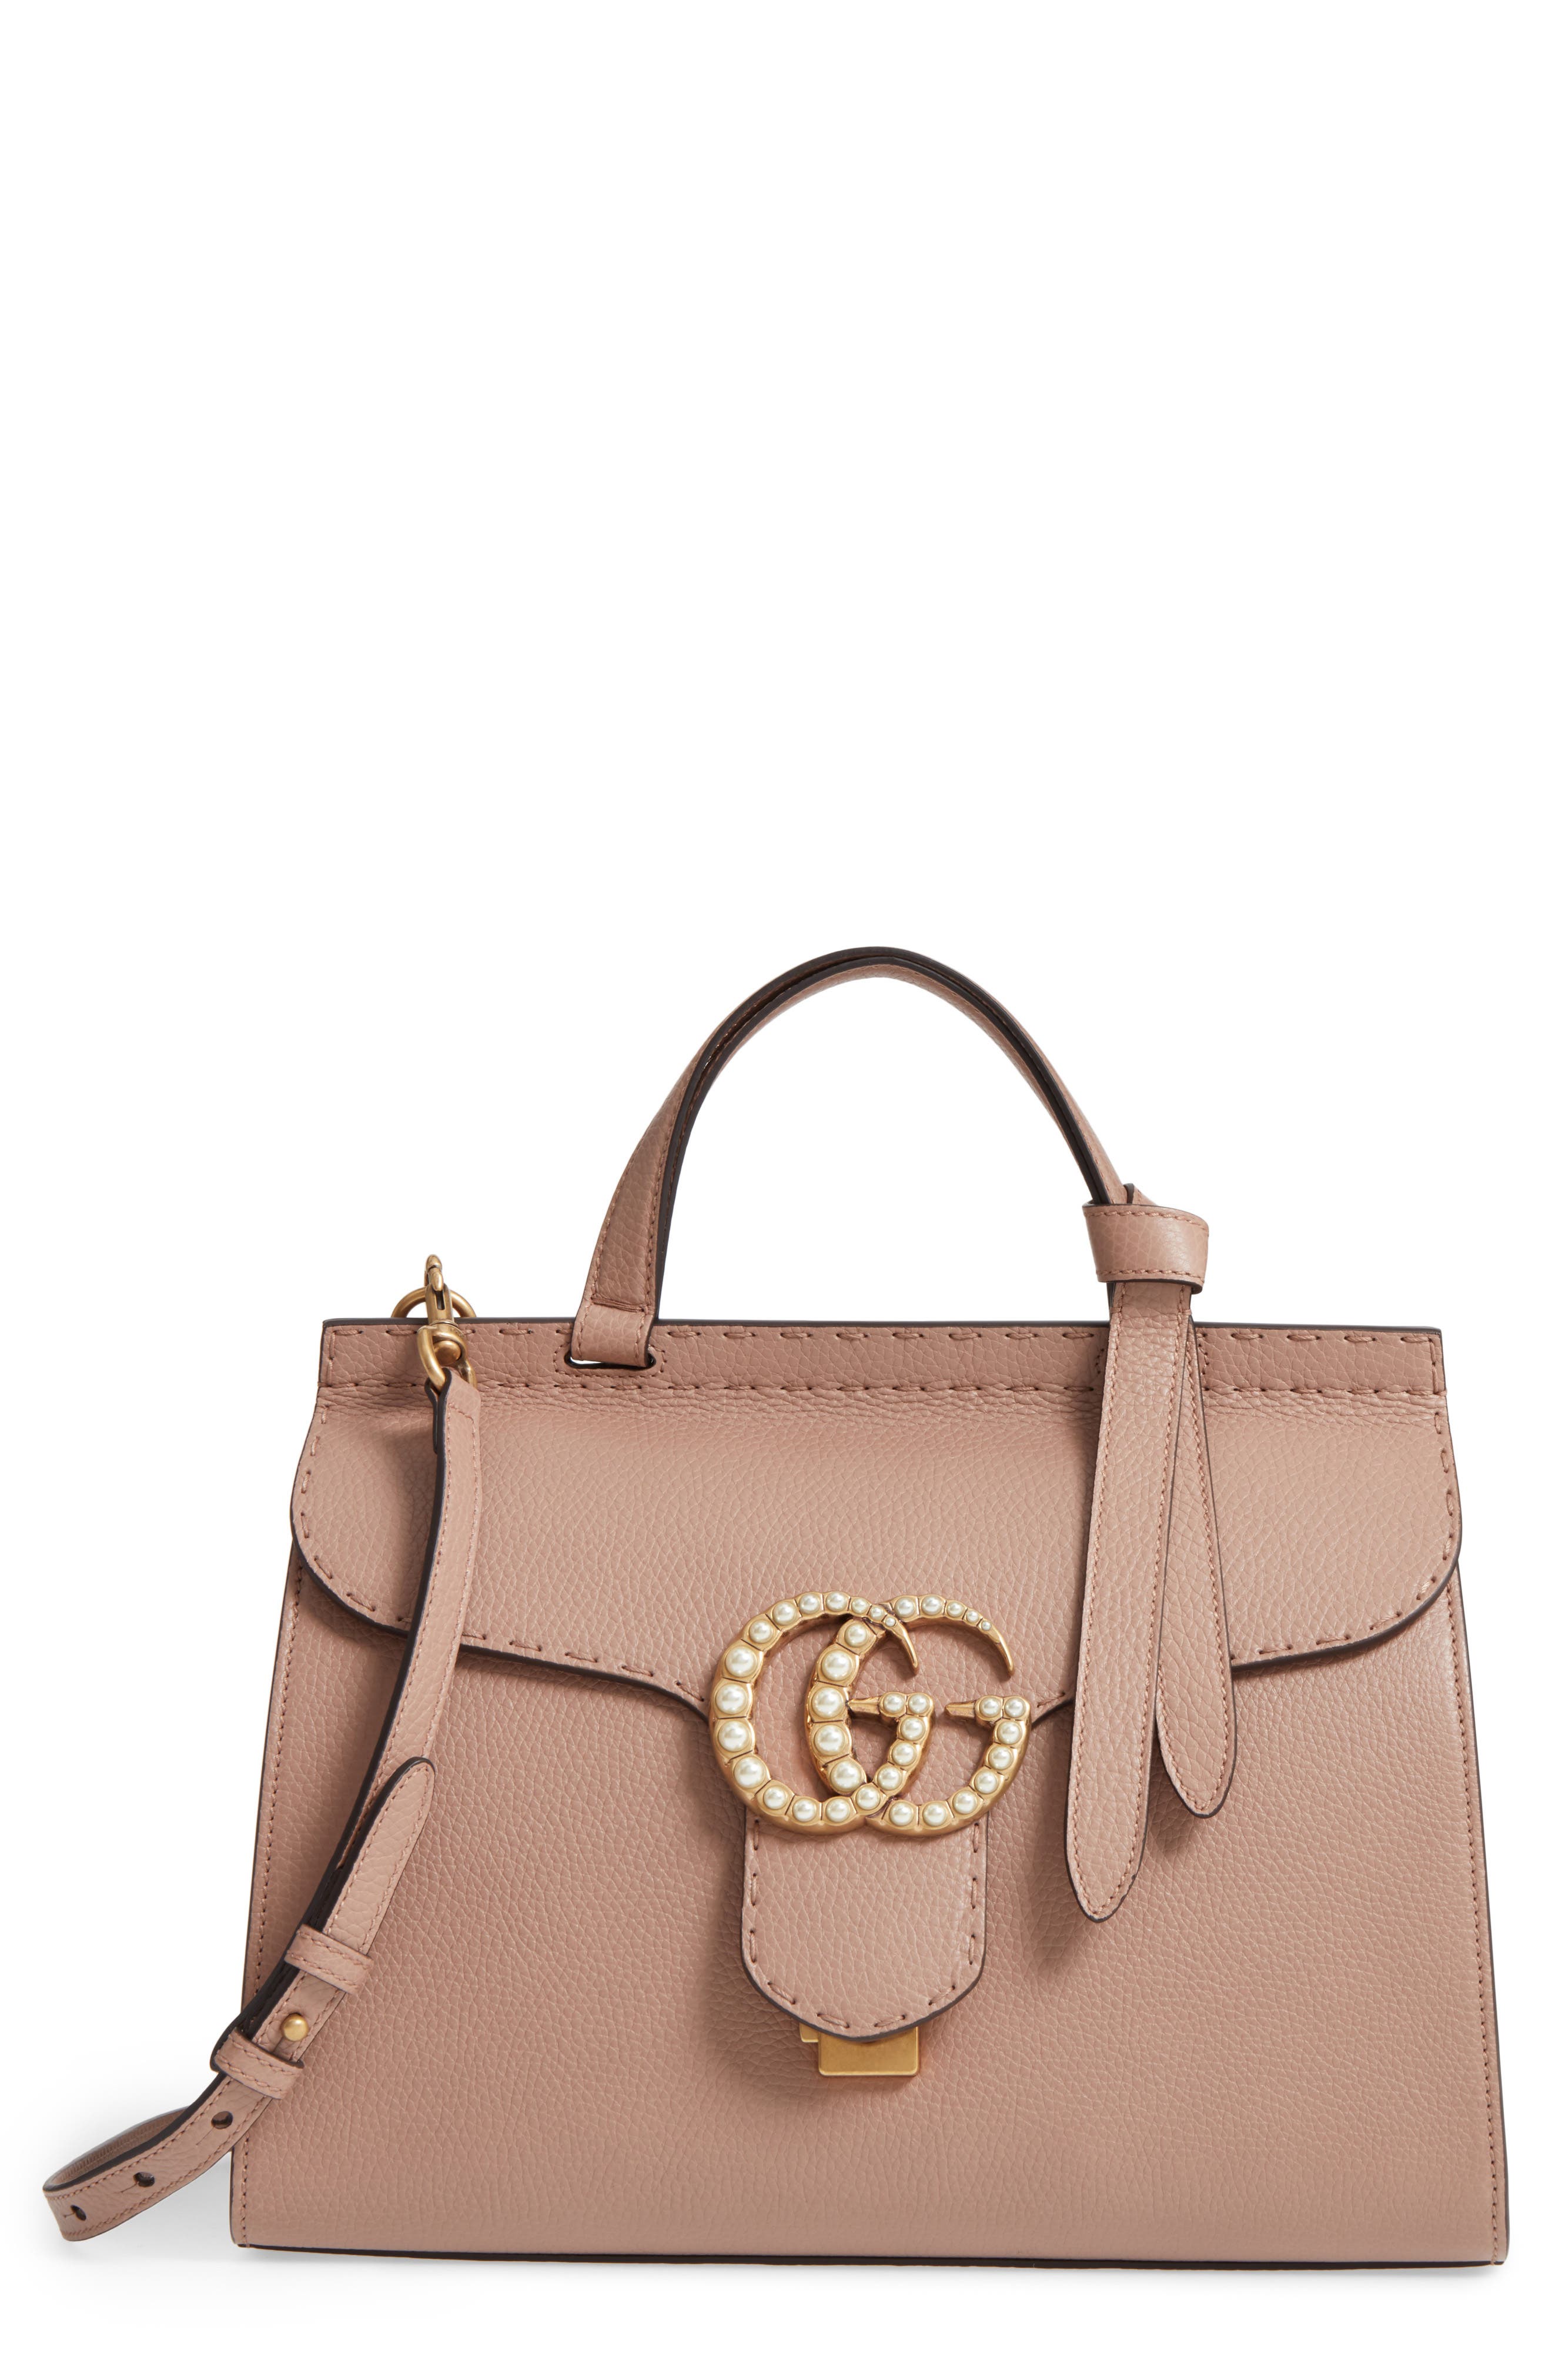 gg marmont top handle leather satchel